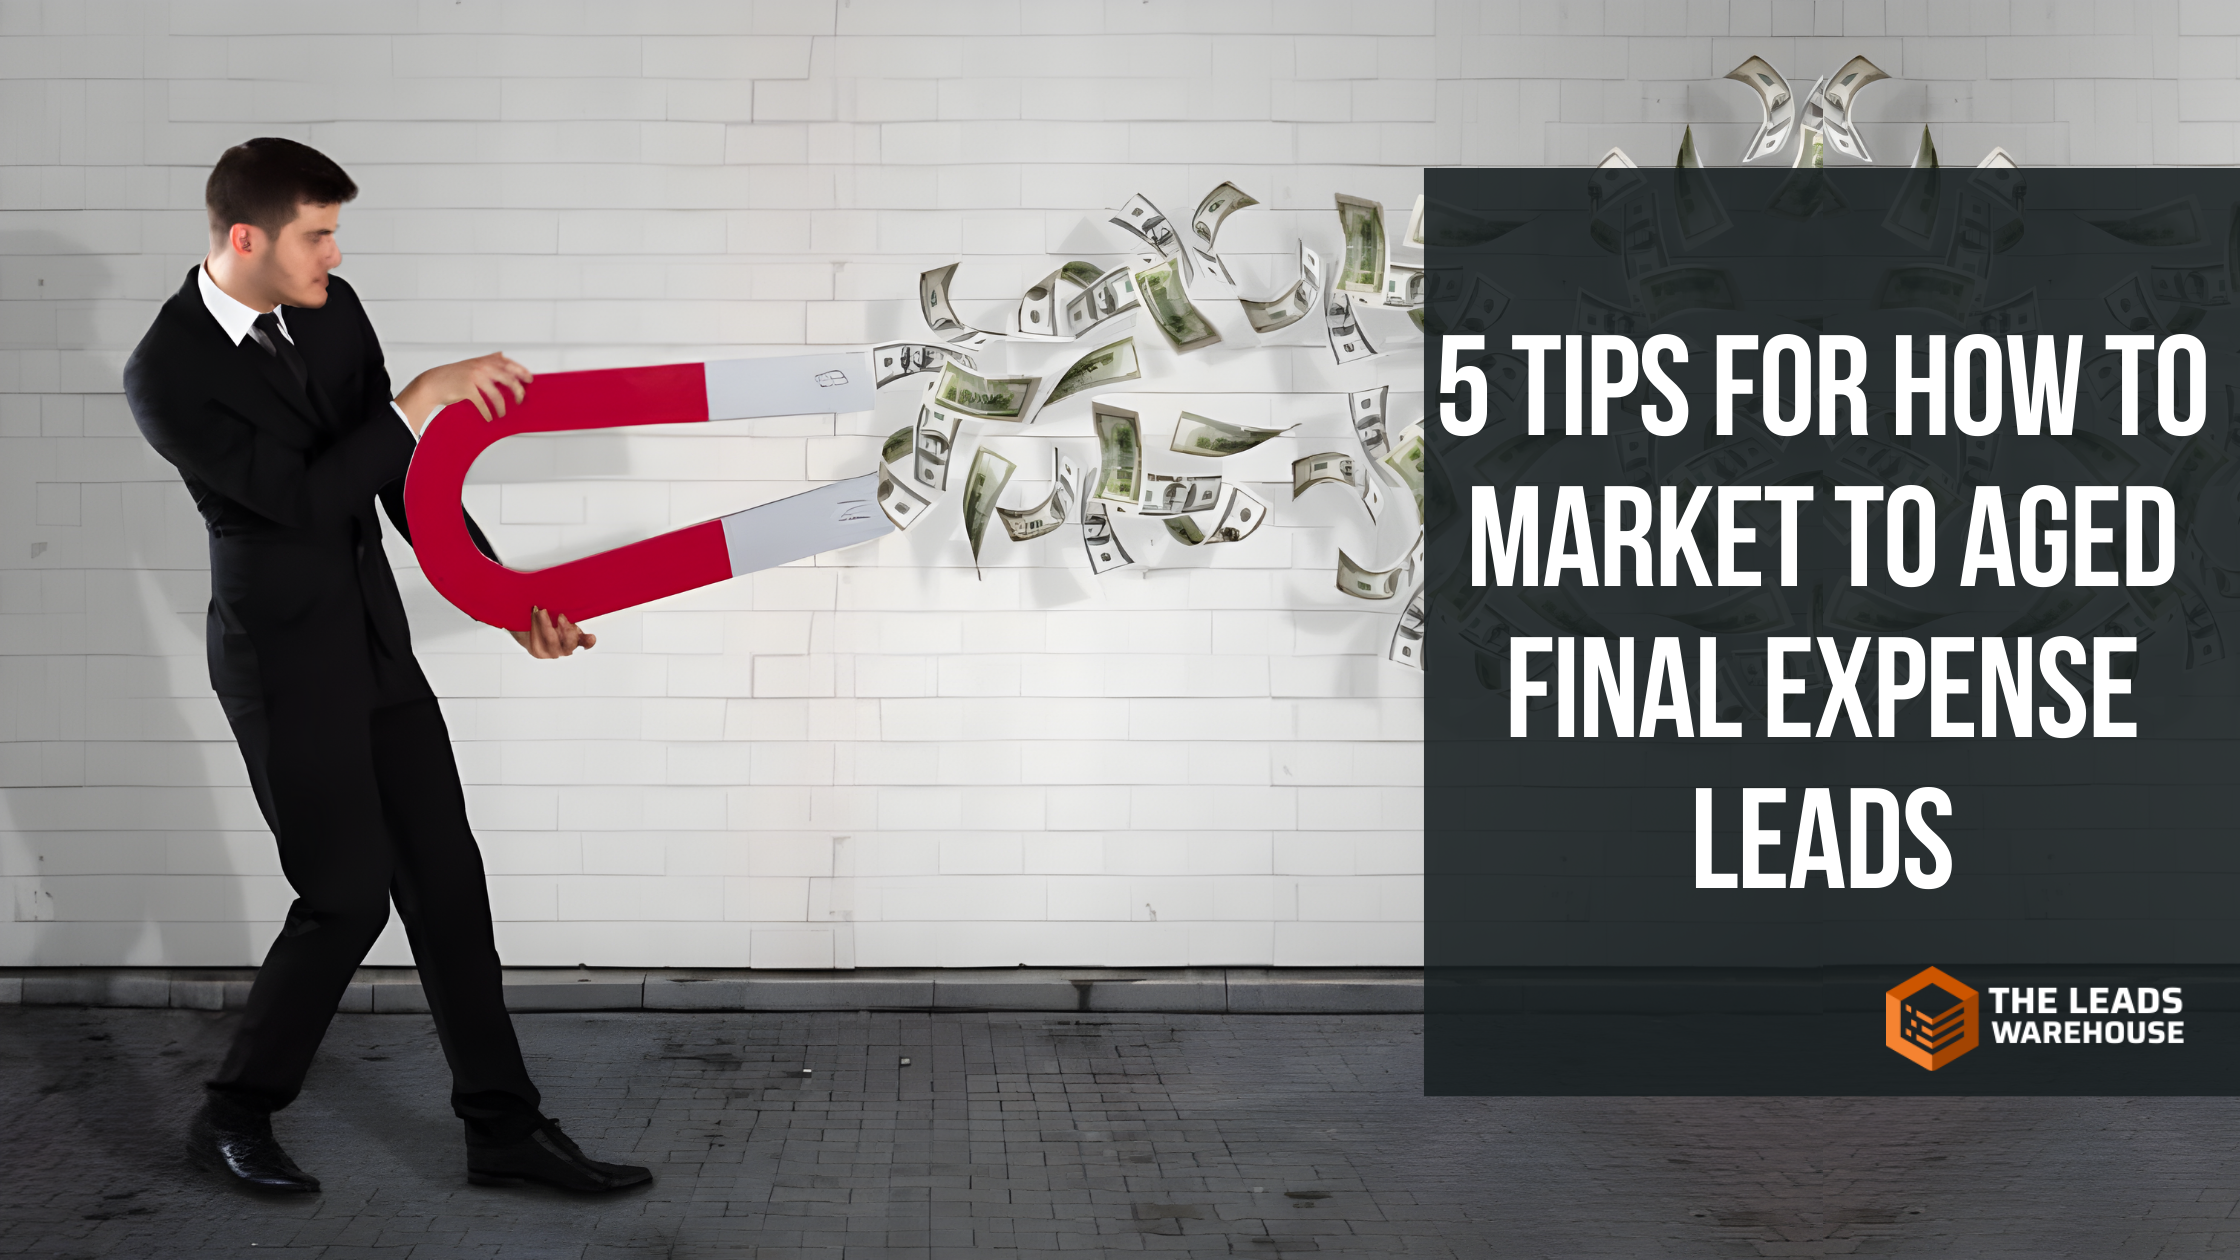 Market To Aged Final Expense Leads | 5 Tips